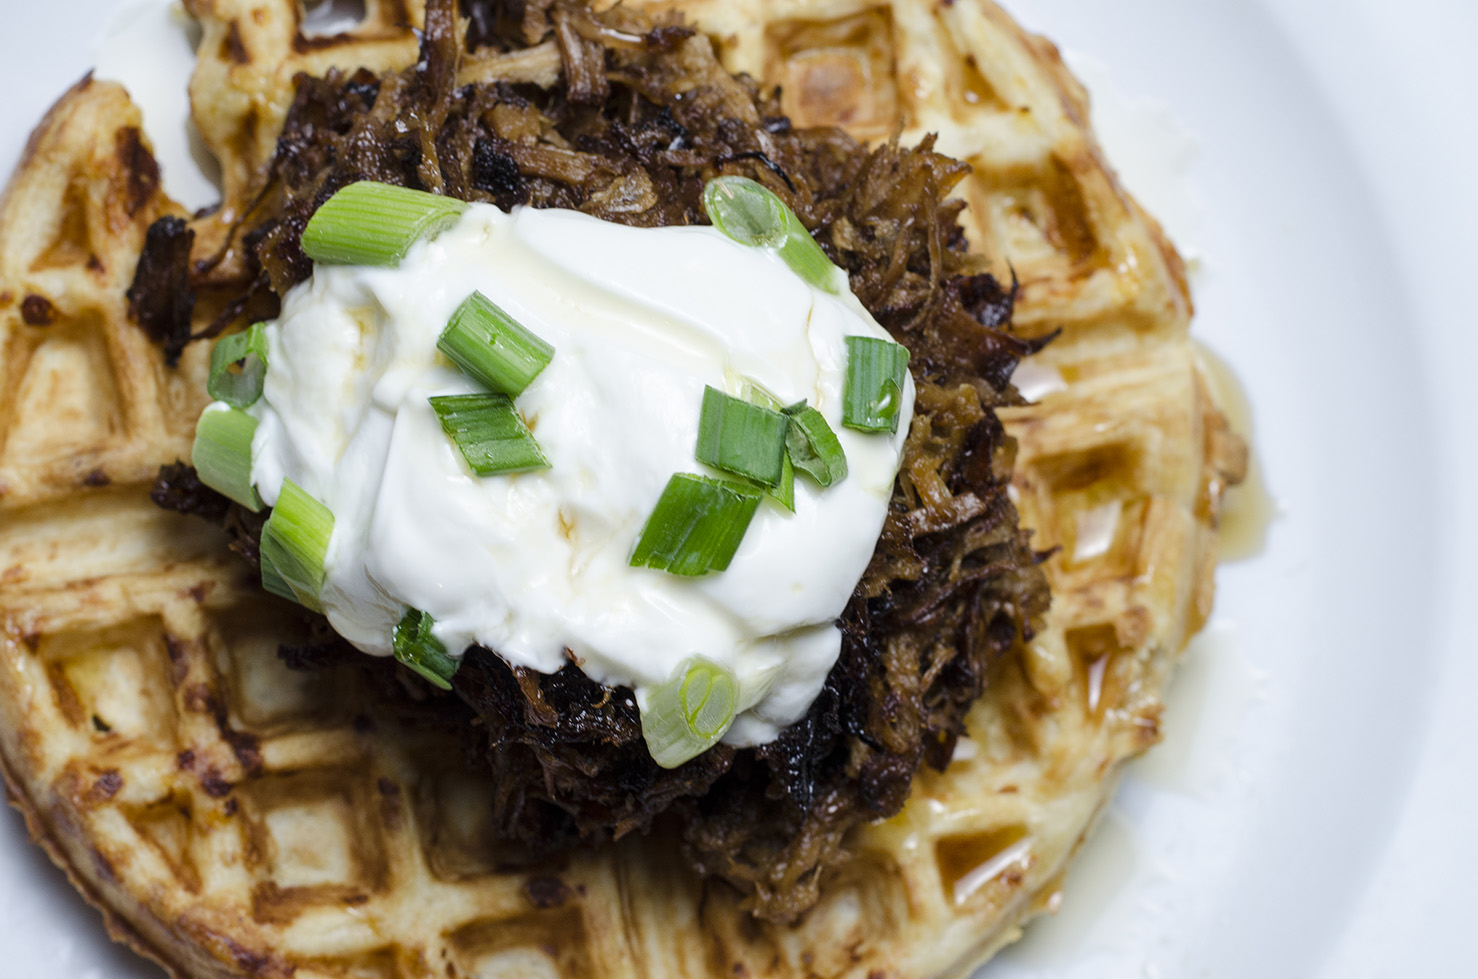 Pulled pork over a savoury cheese waffle.